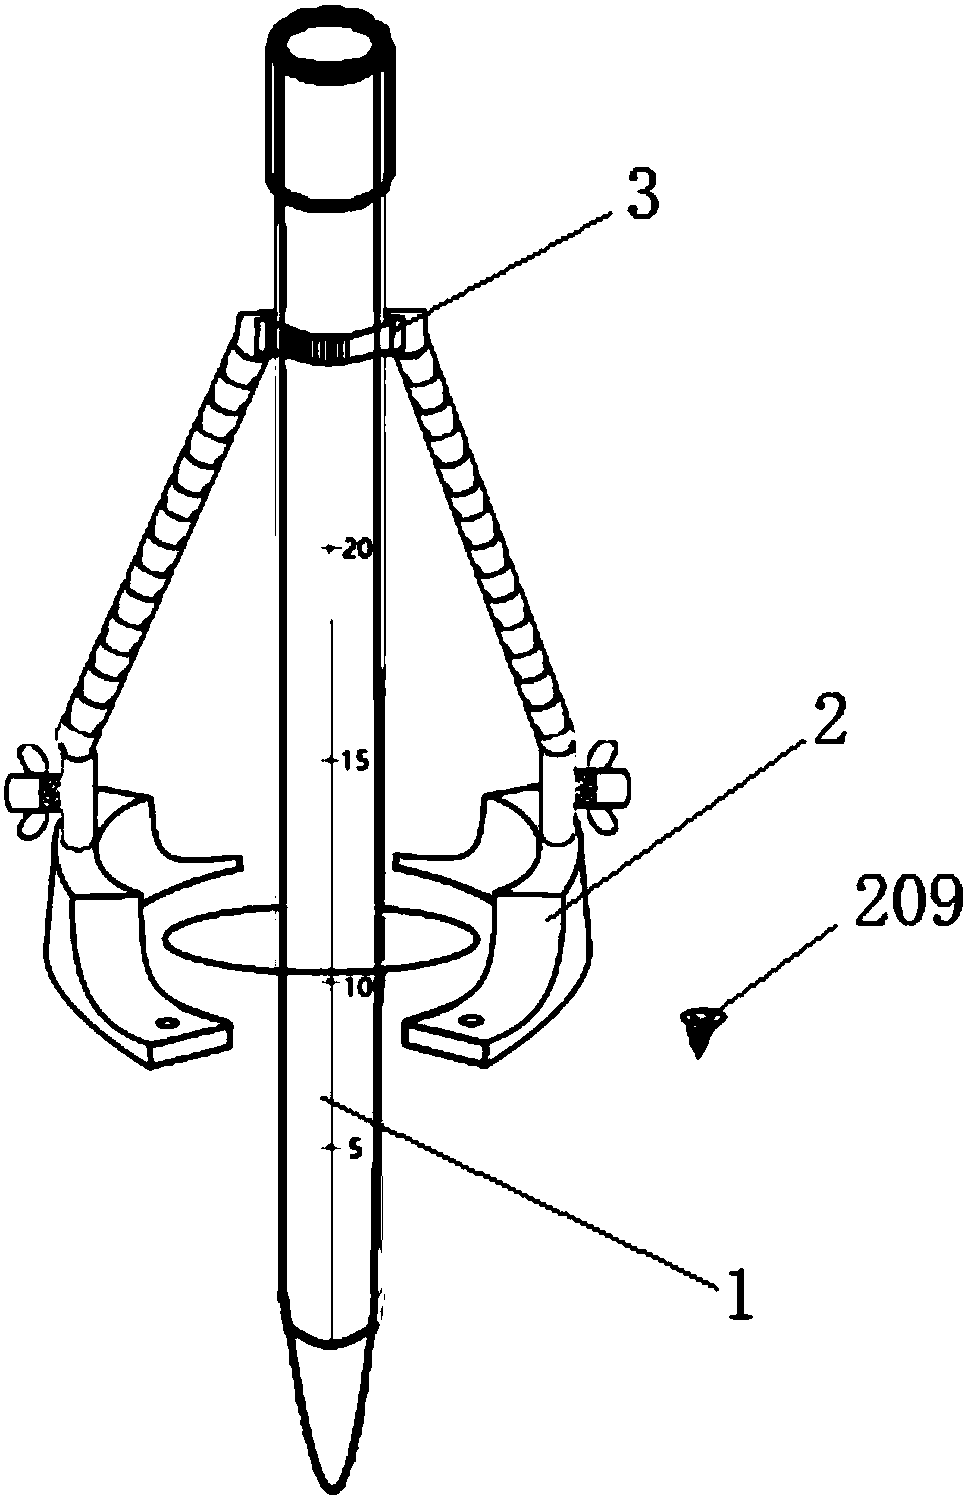 Neuroendoscope soft channel with a support arm capable of retracting scalp and adjusting skull